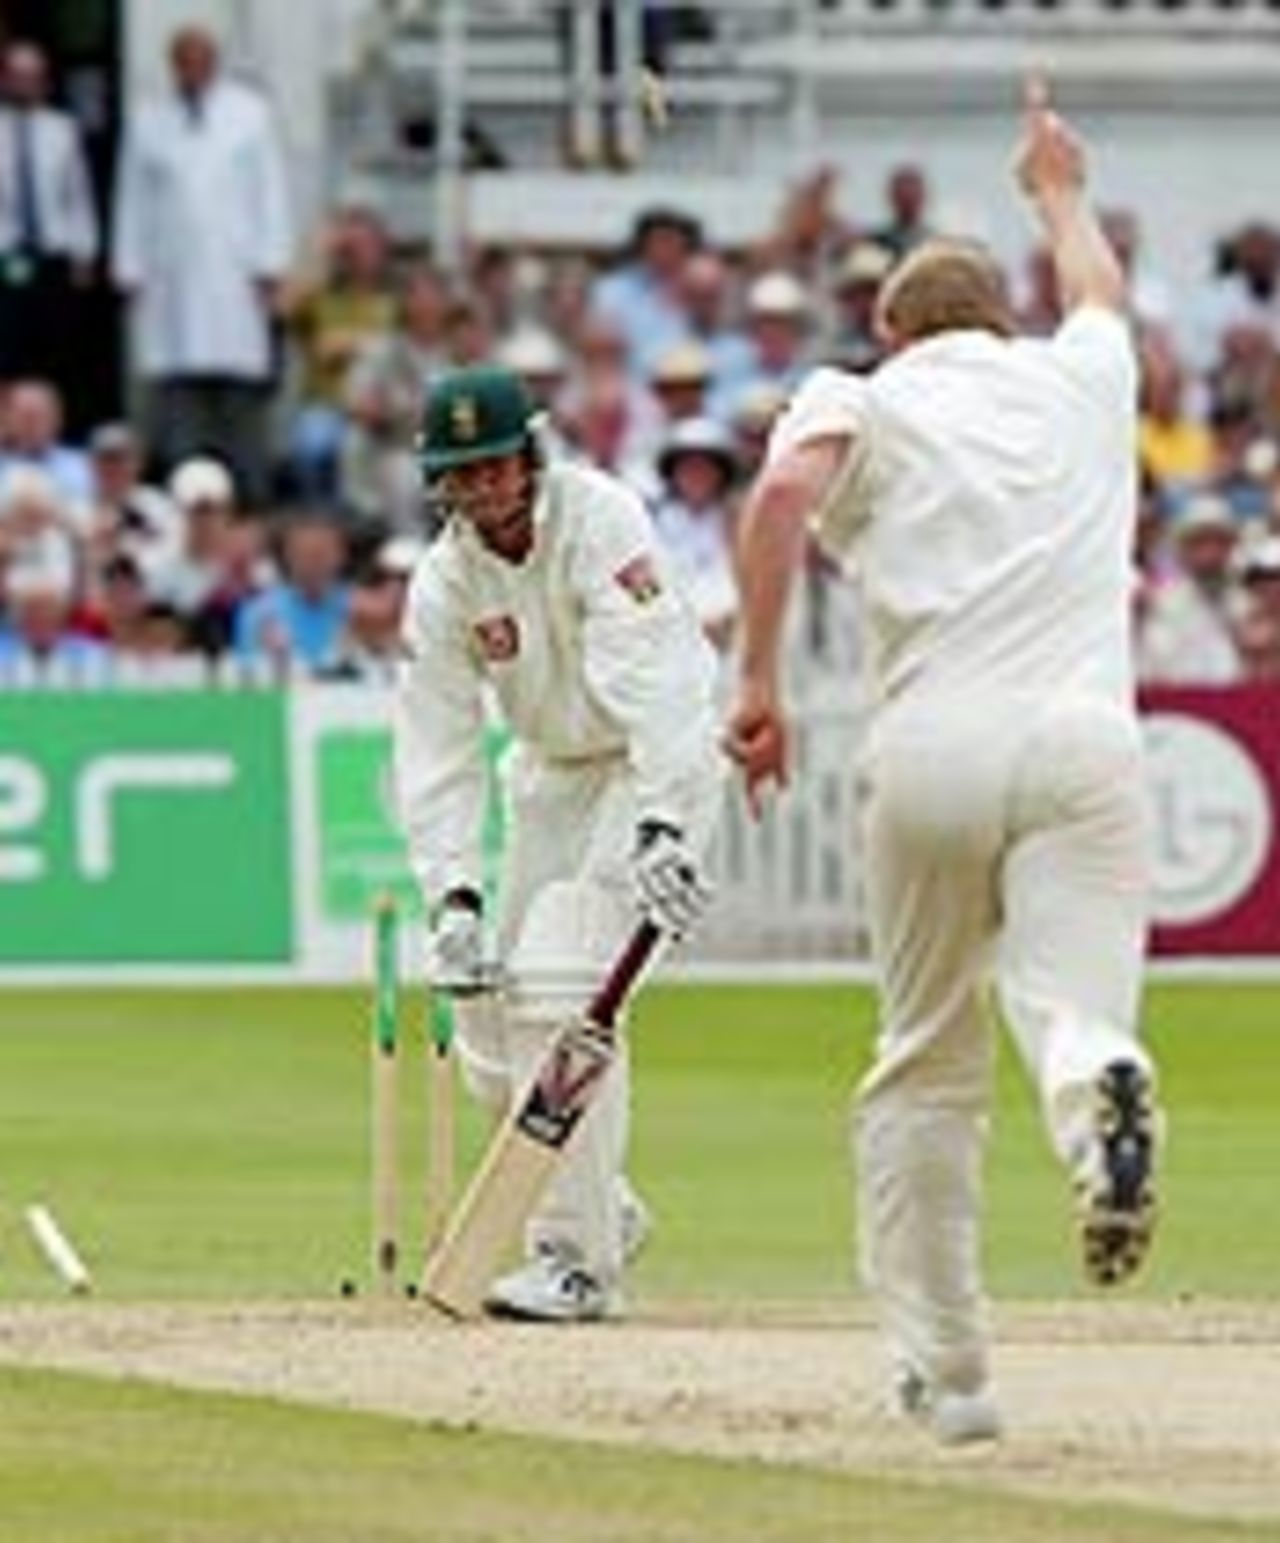 Andrew Flintoff bowls Shaun Pollock, England v South Africa, 3rd Test, August 18, 2003